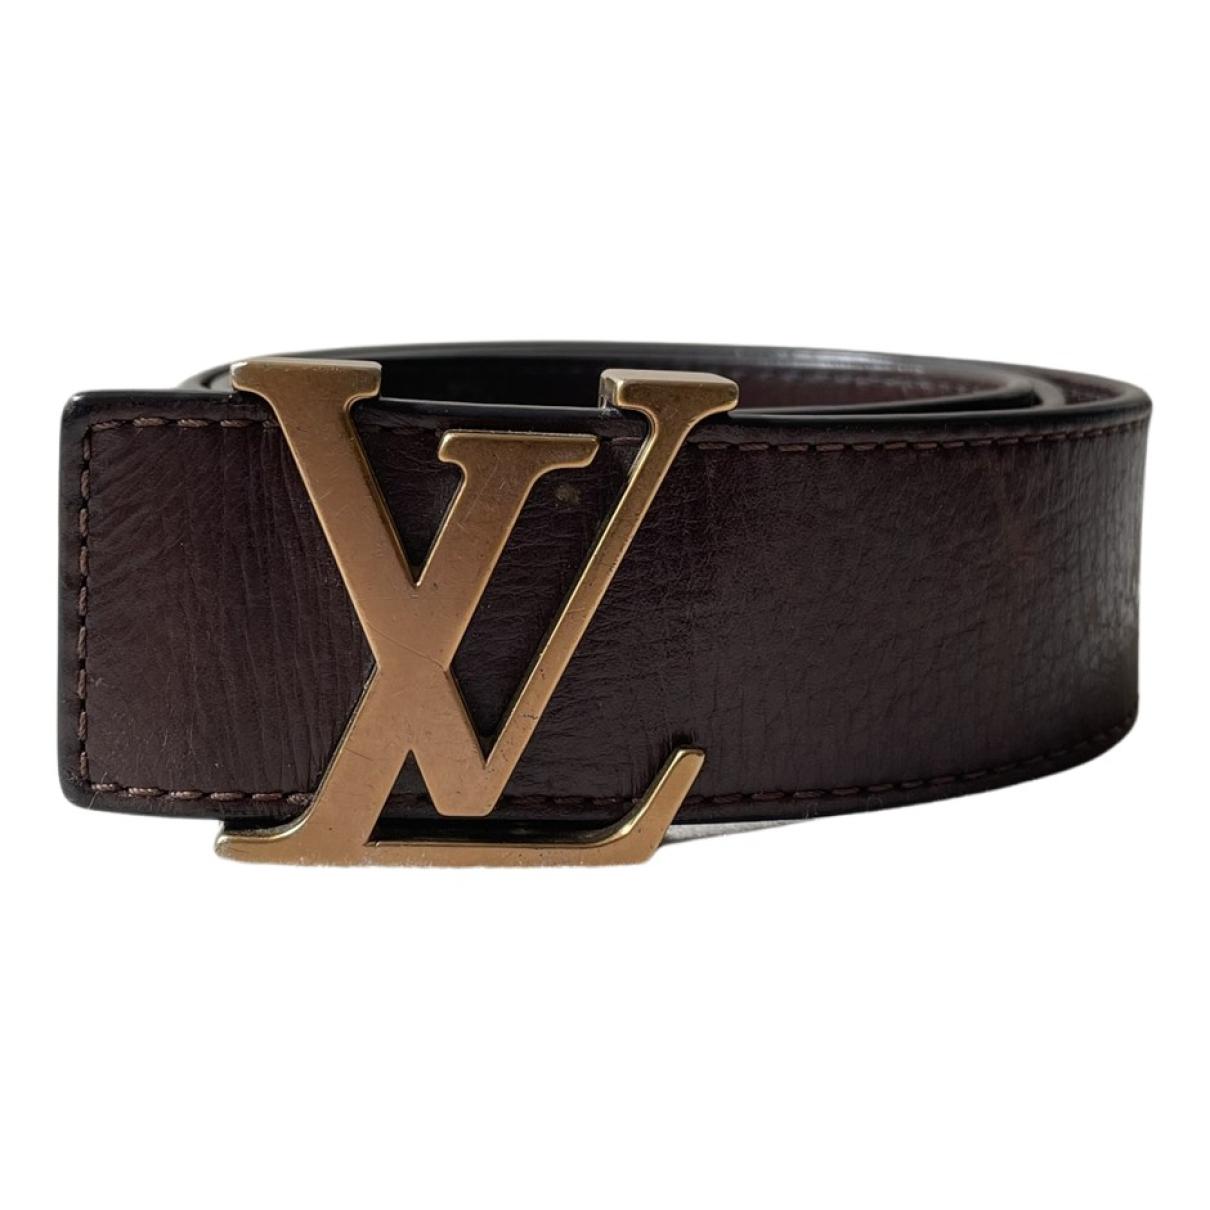 Initiales leather belt Louis Vuitton Brown size 90 cm in Leather